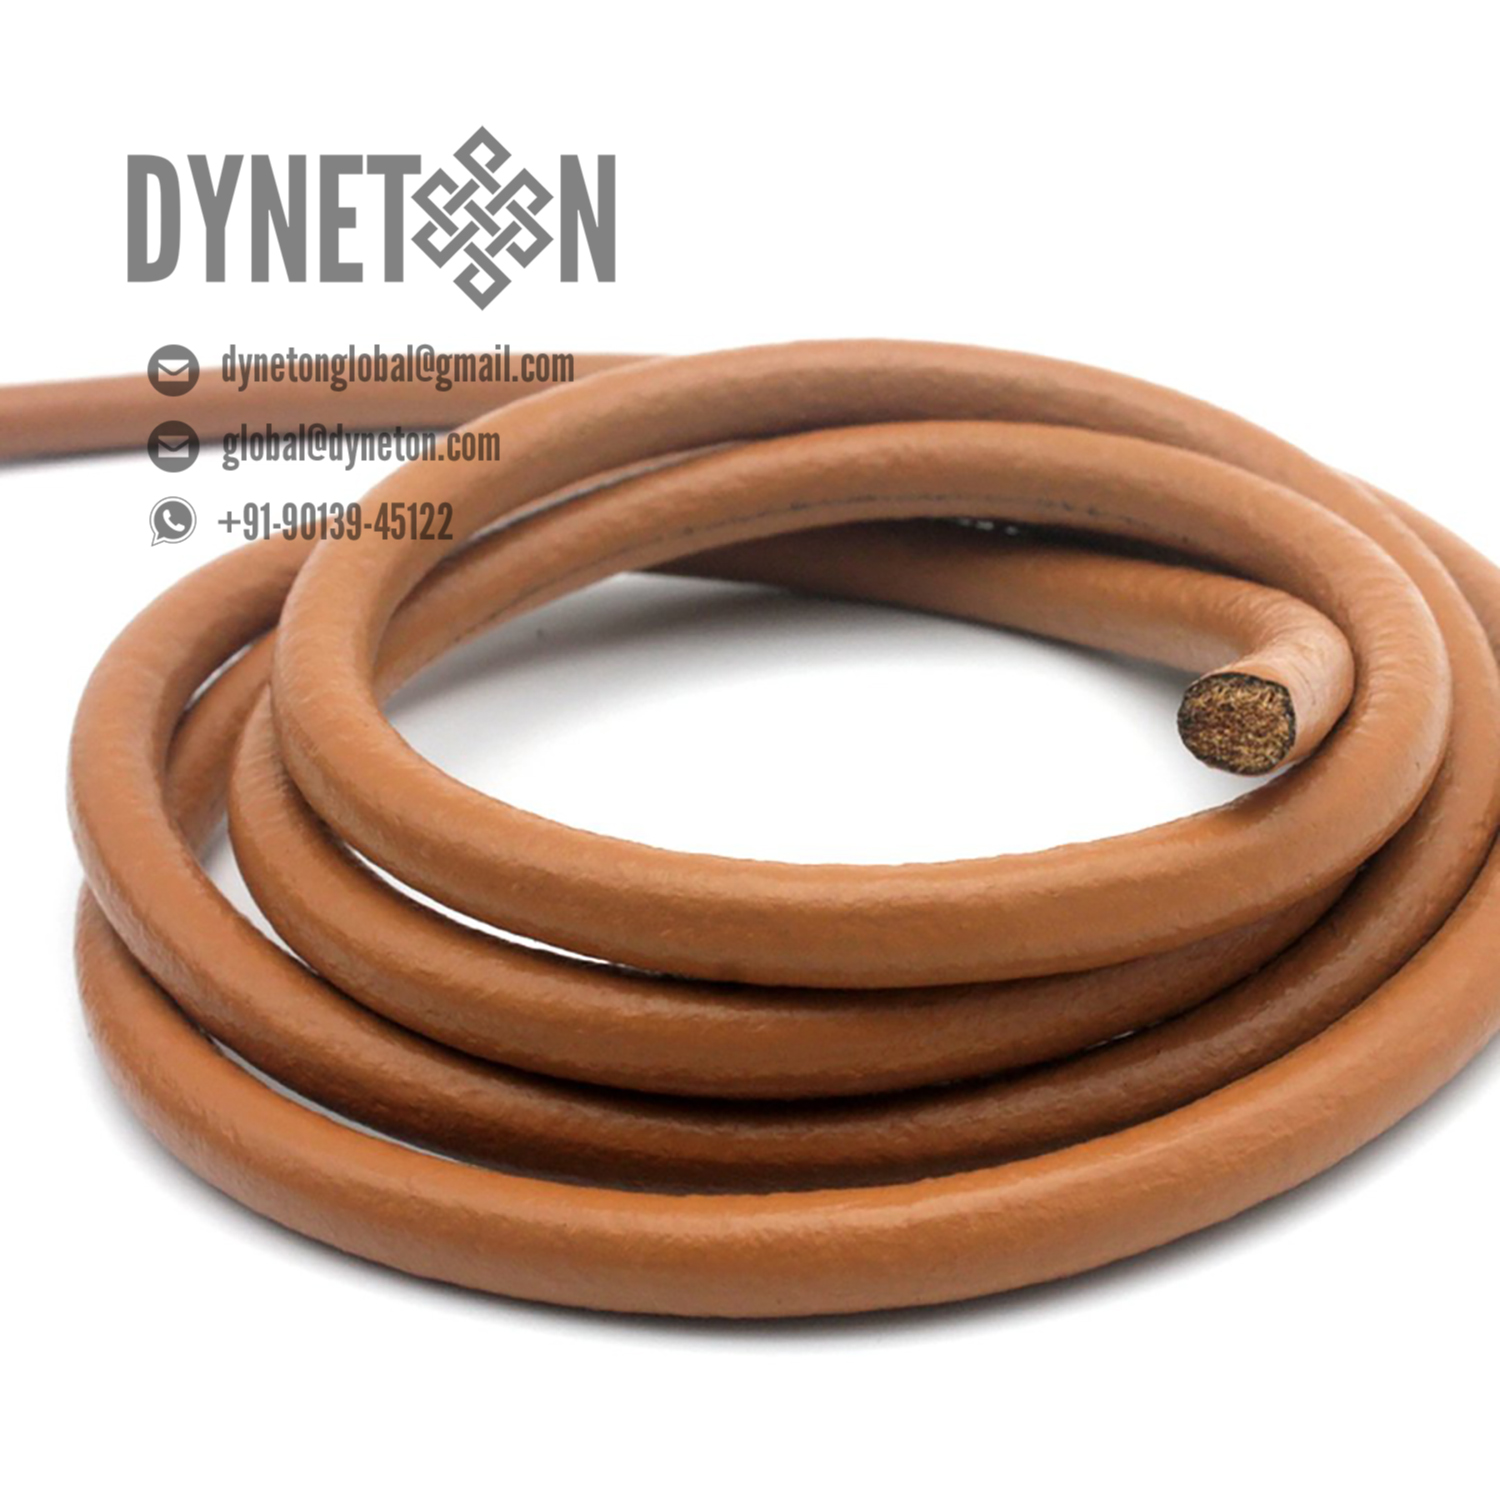 7mm Round Leather Cord - DYNETON / Round Leather Cords 7 mm